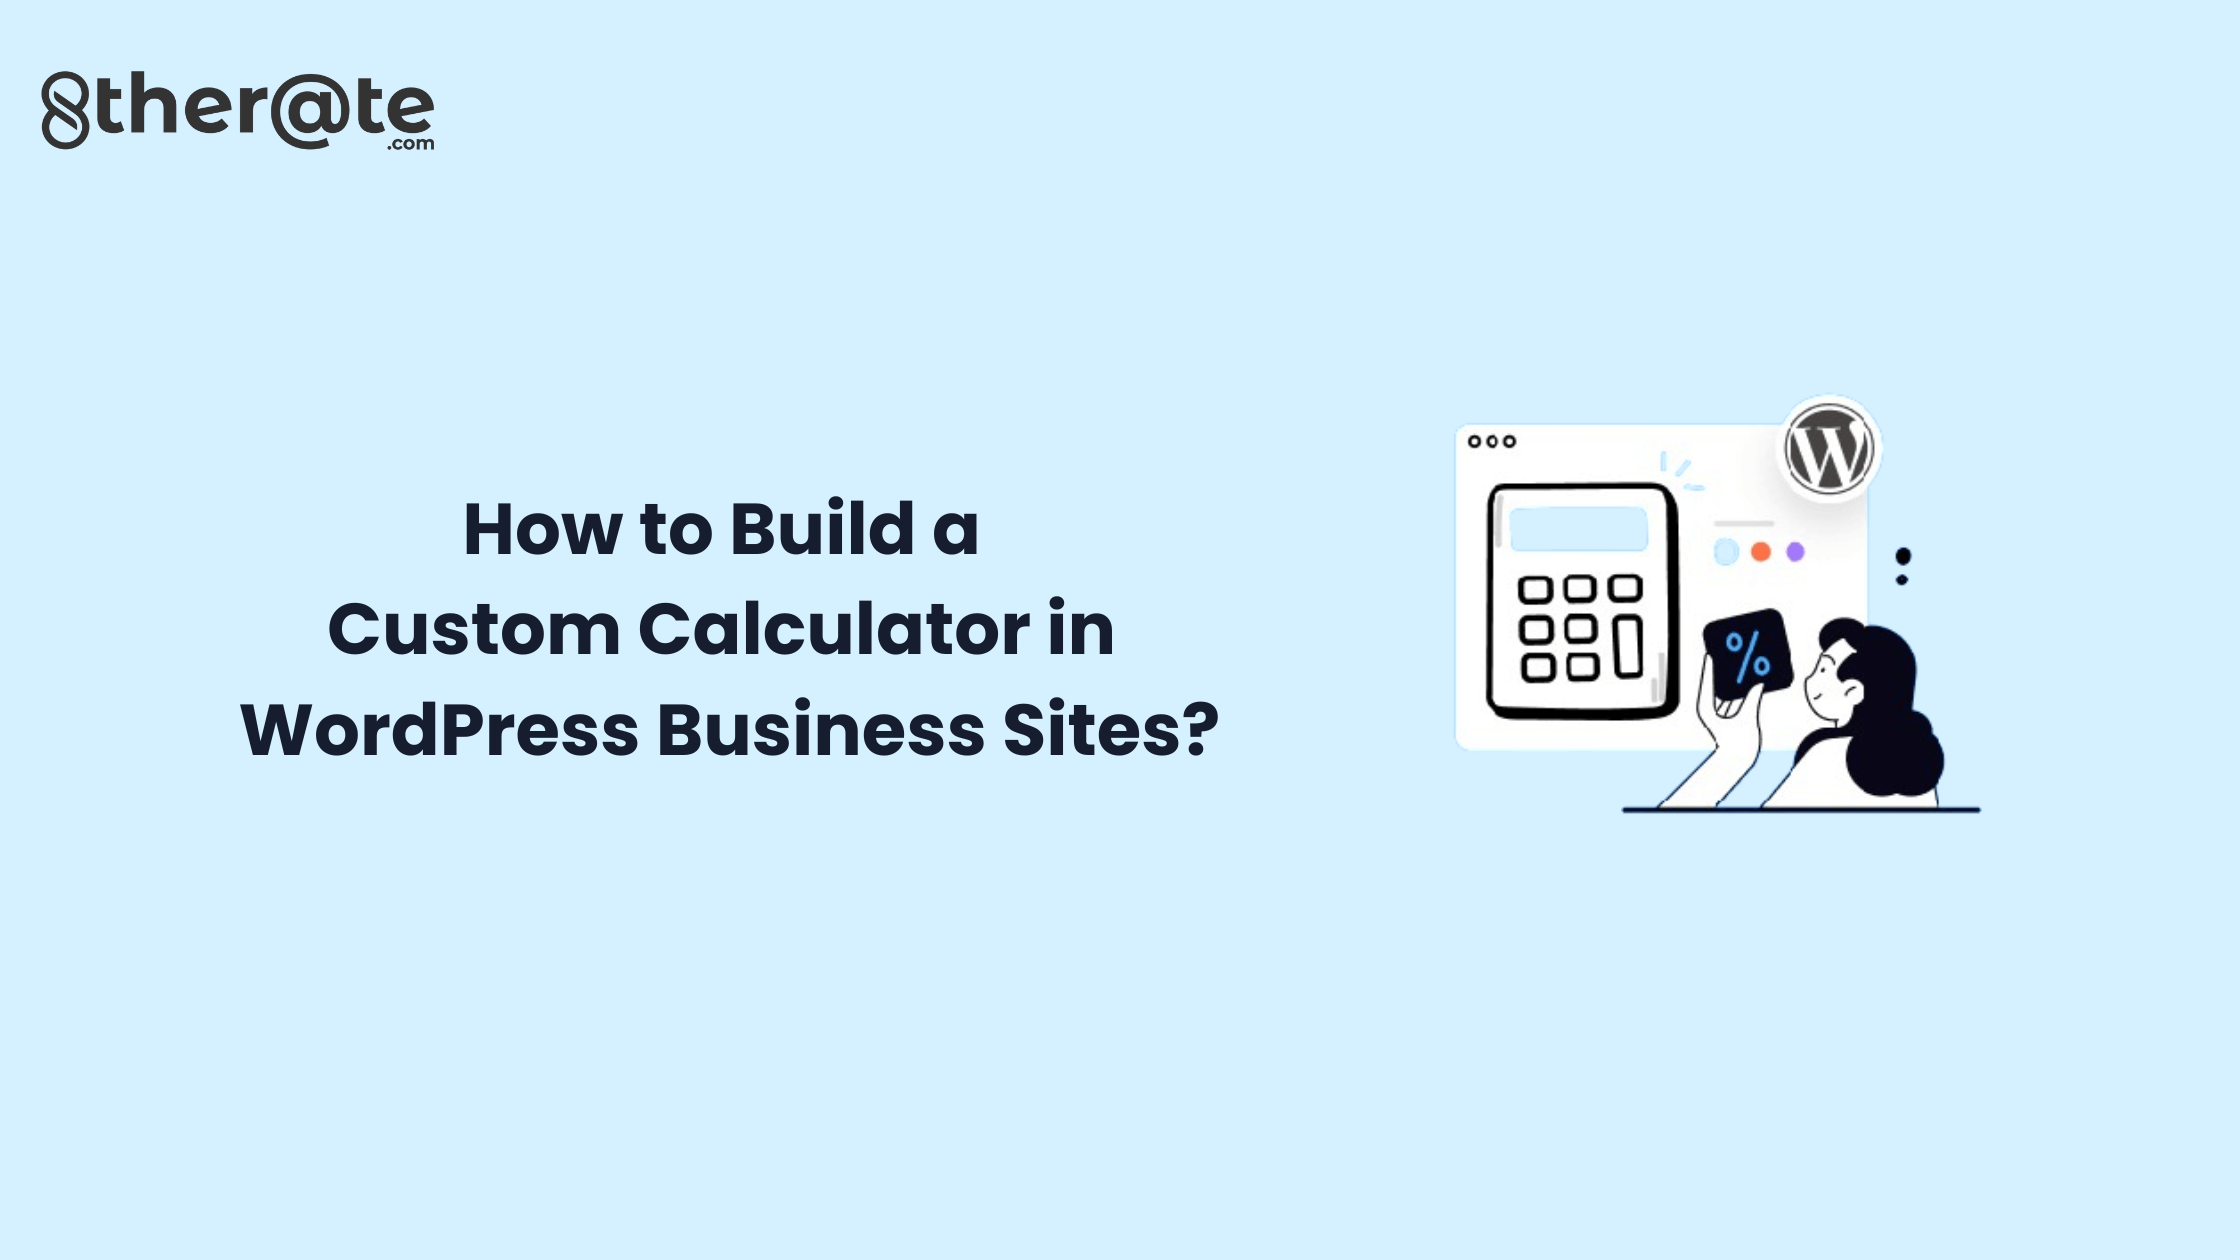 How to Build a Custom Calculator in WordPress Business Sites?